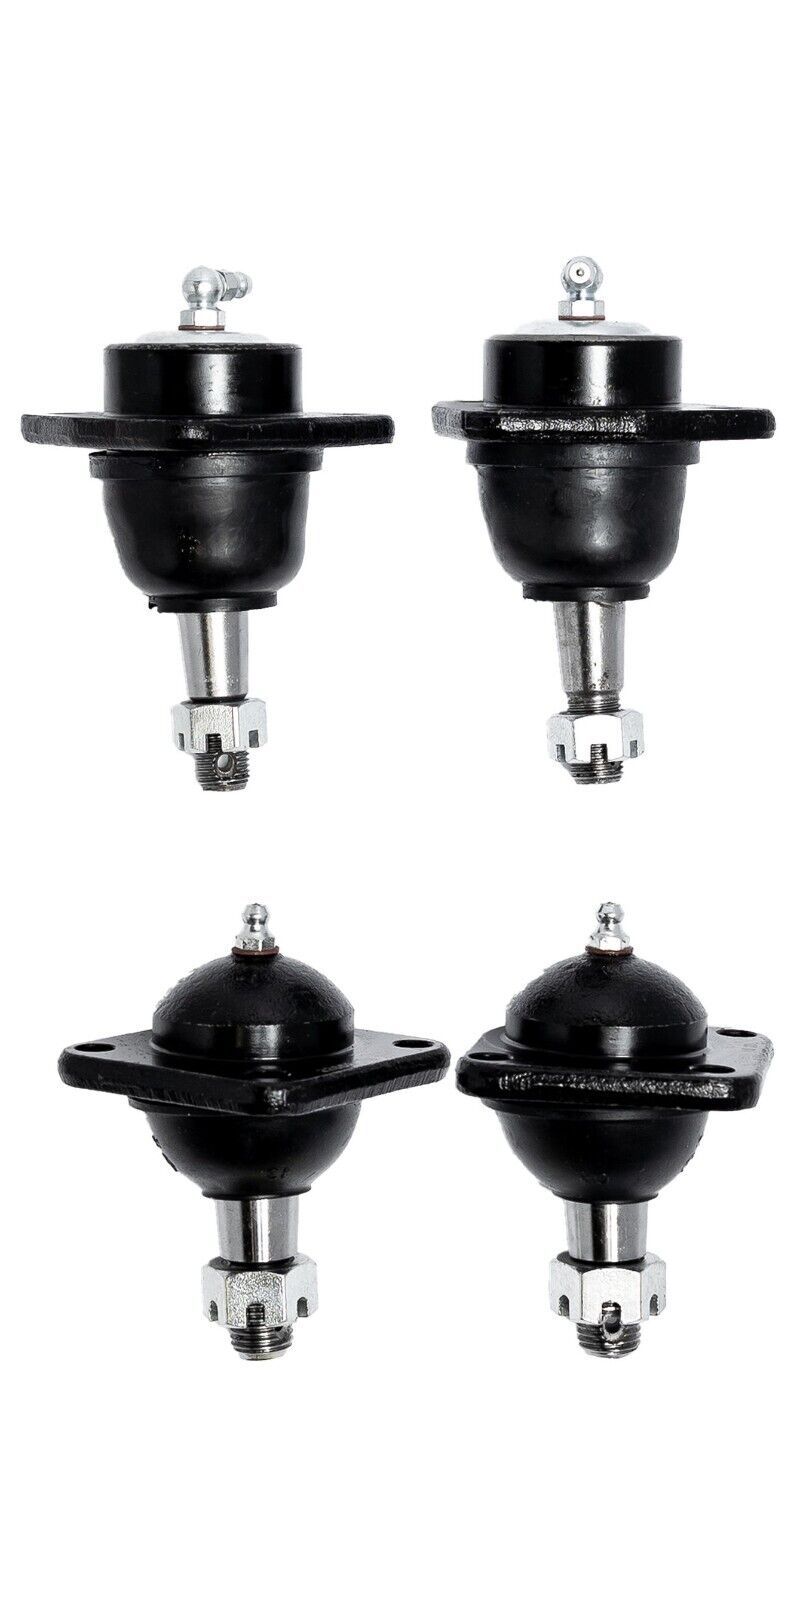 Ball Joint Set Fits 1965 - 1970 Pontiac Full Size Catalina Bonneville Star Chief